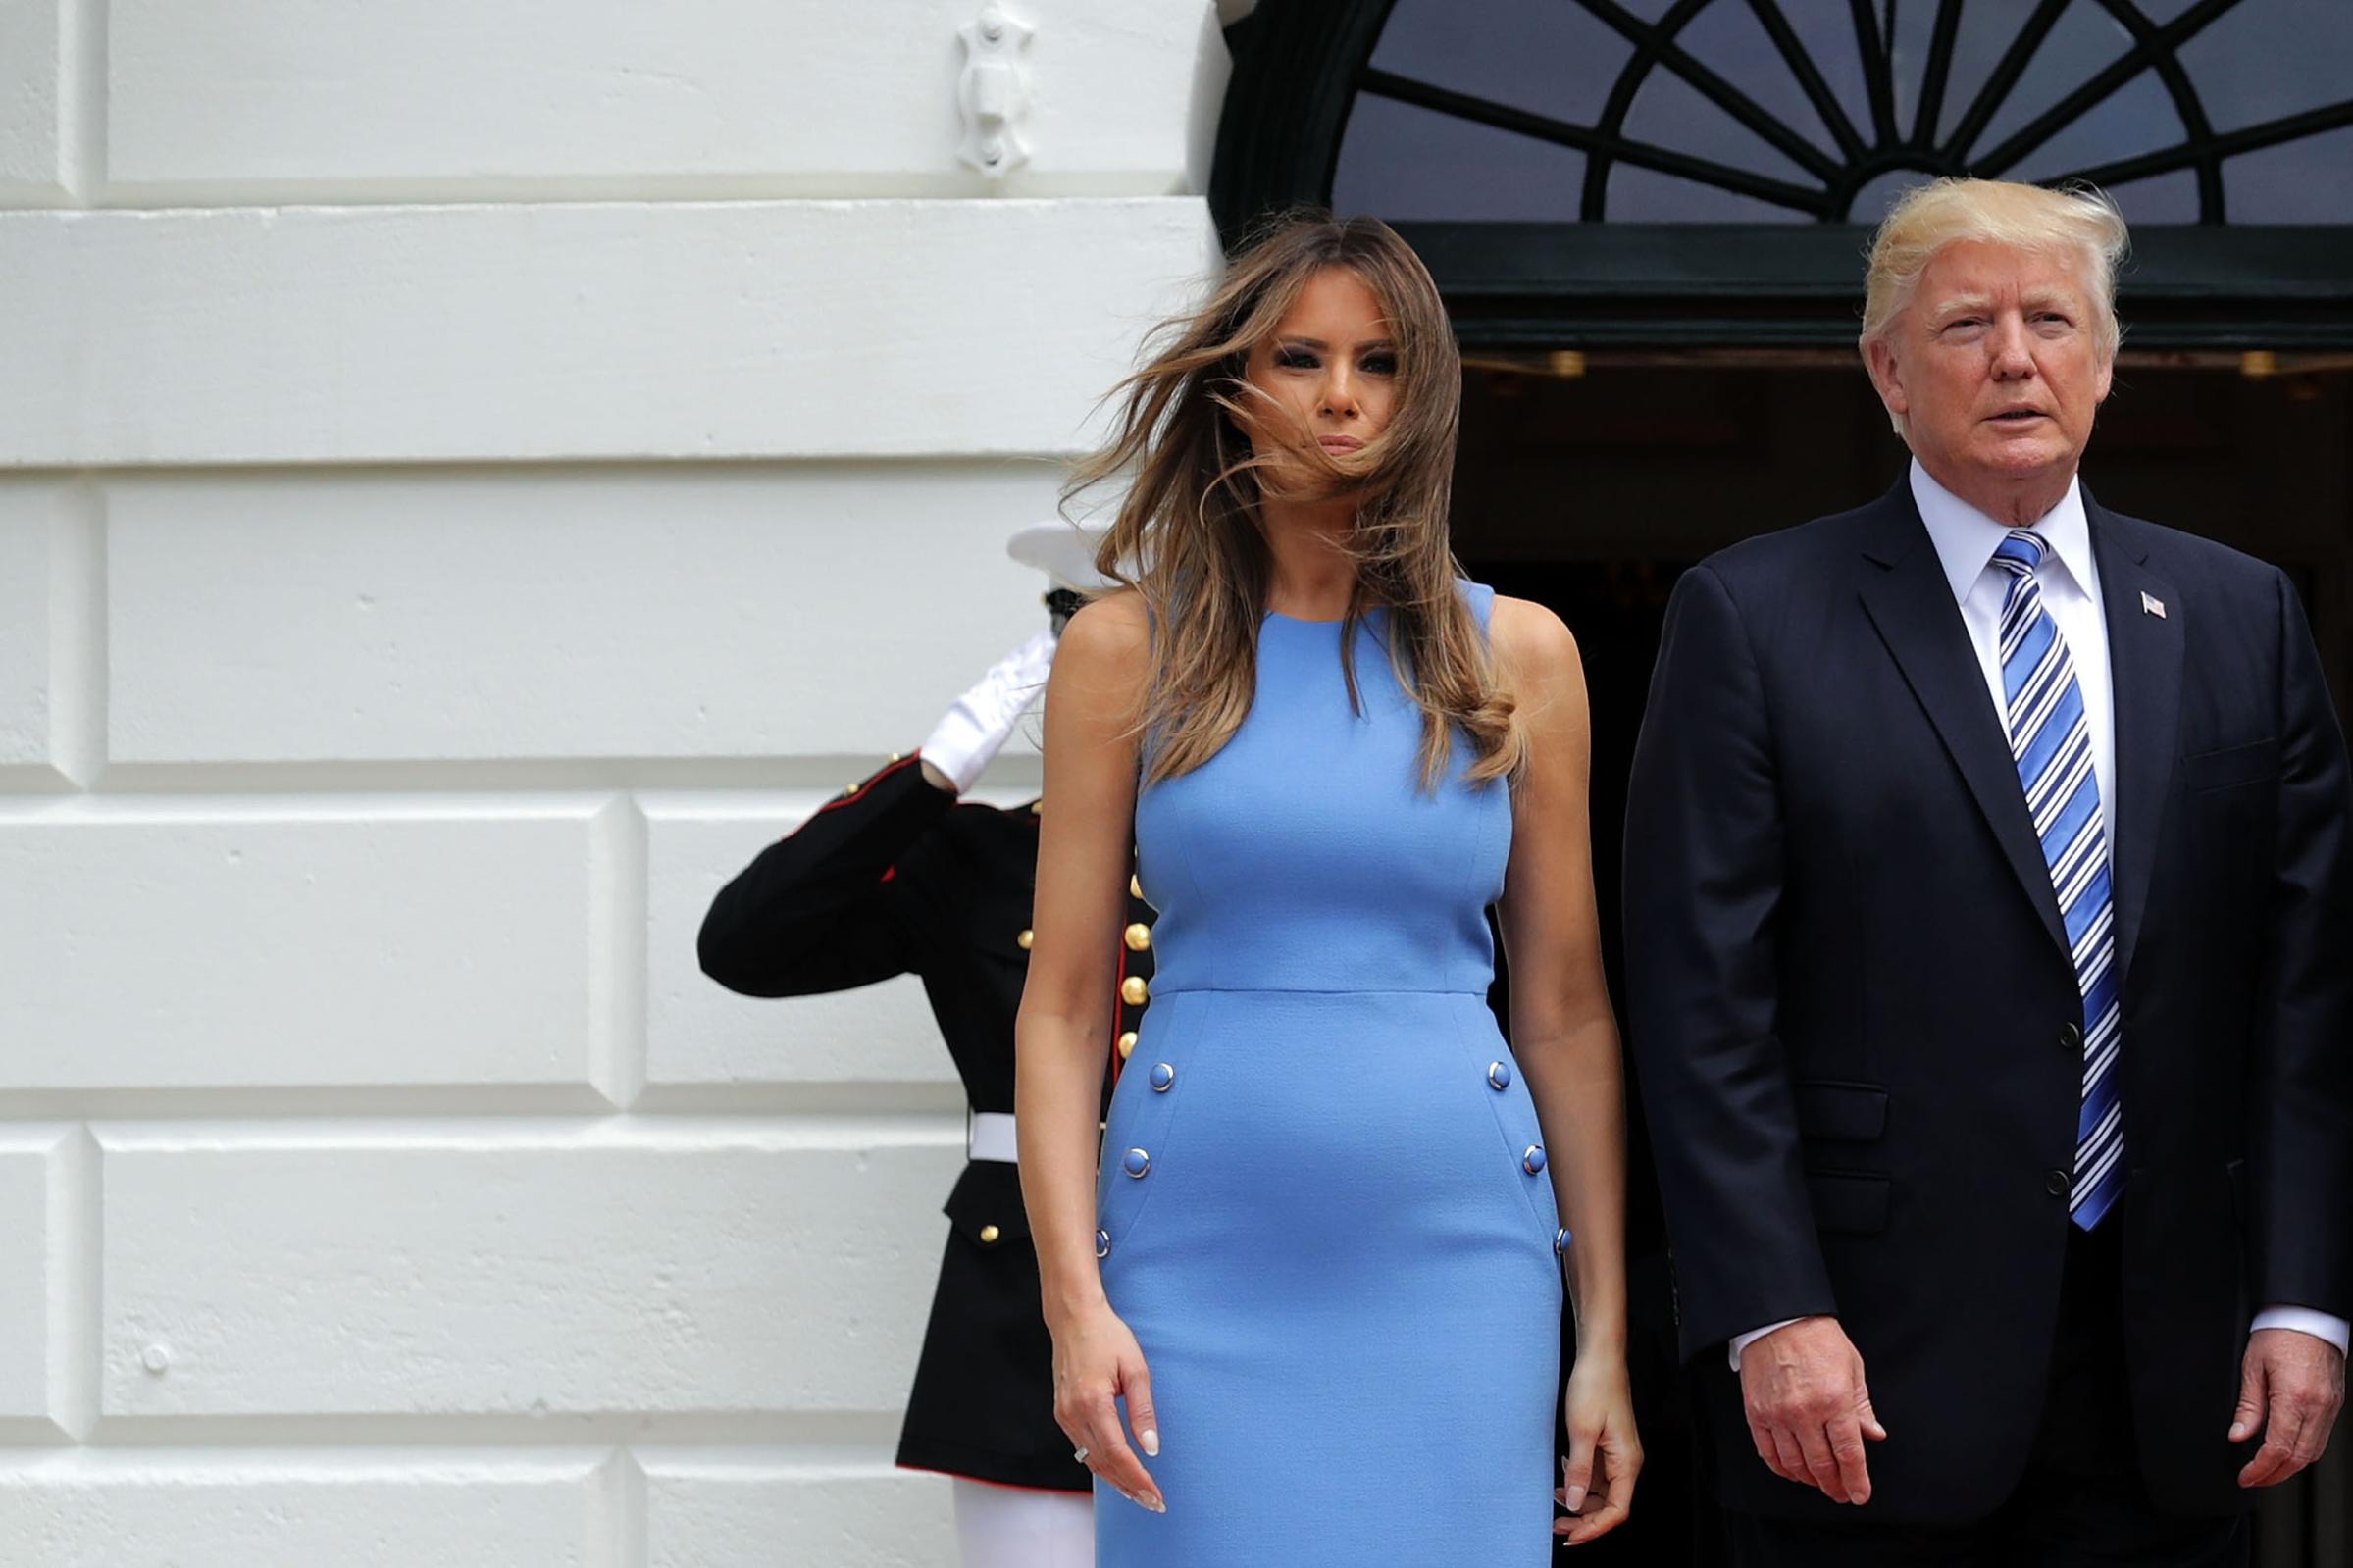 President Donald Trump (R) and first lady Melania Trump wearing a Michael Kors Collection blue sheath dress pose for photographs with Panamanian President Juan Carlos Varela and his wife Lorena Castillo Garcia de Varela (not pictured) at the White House June 19, 2017.